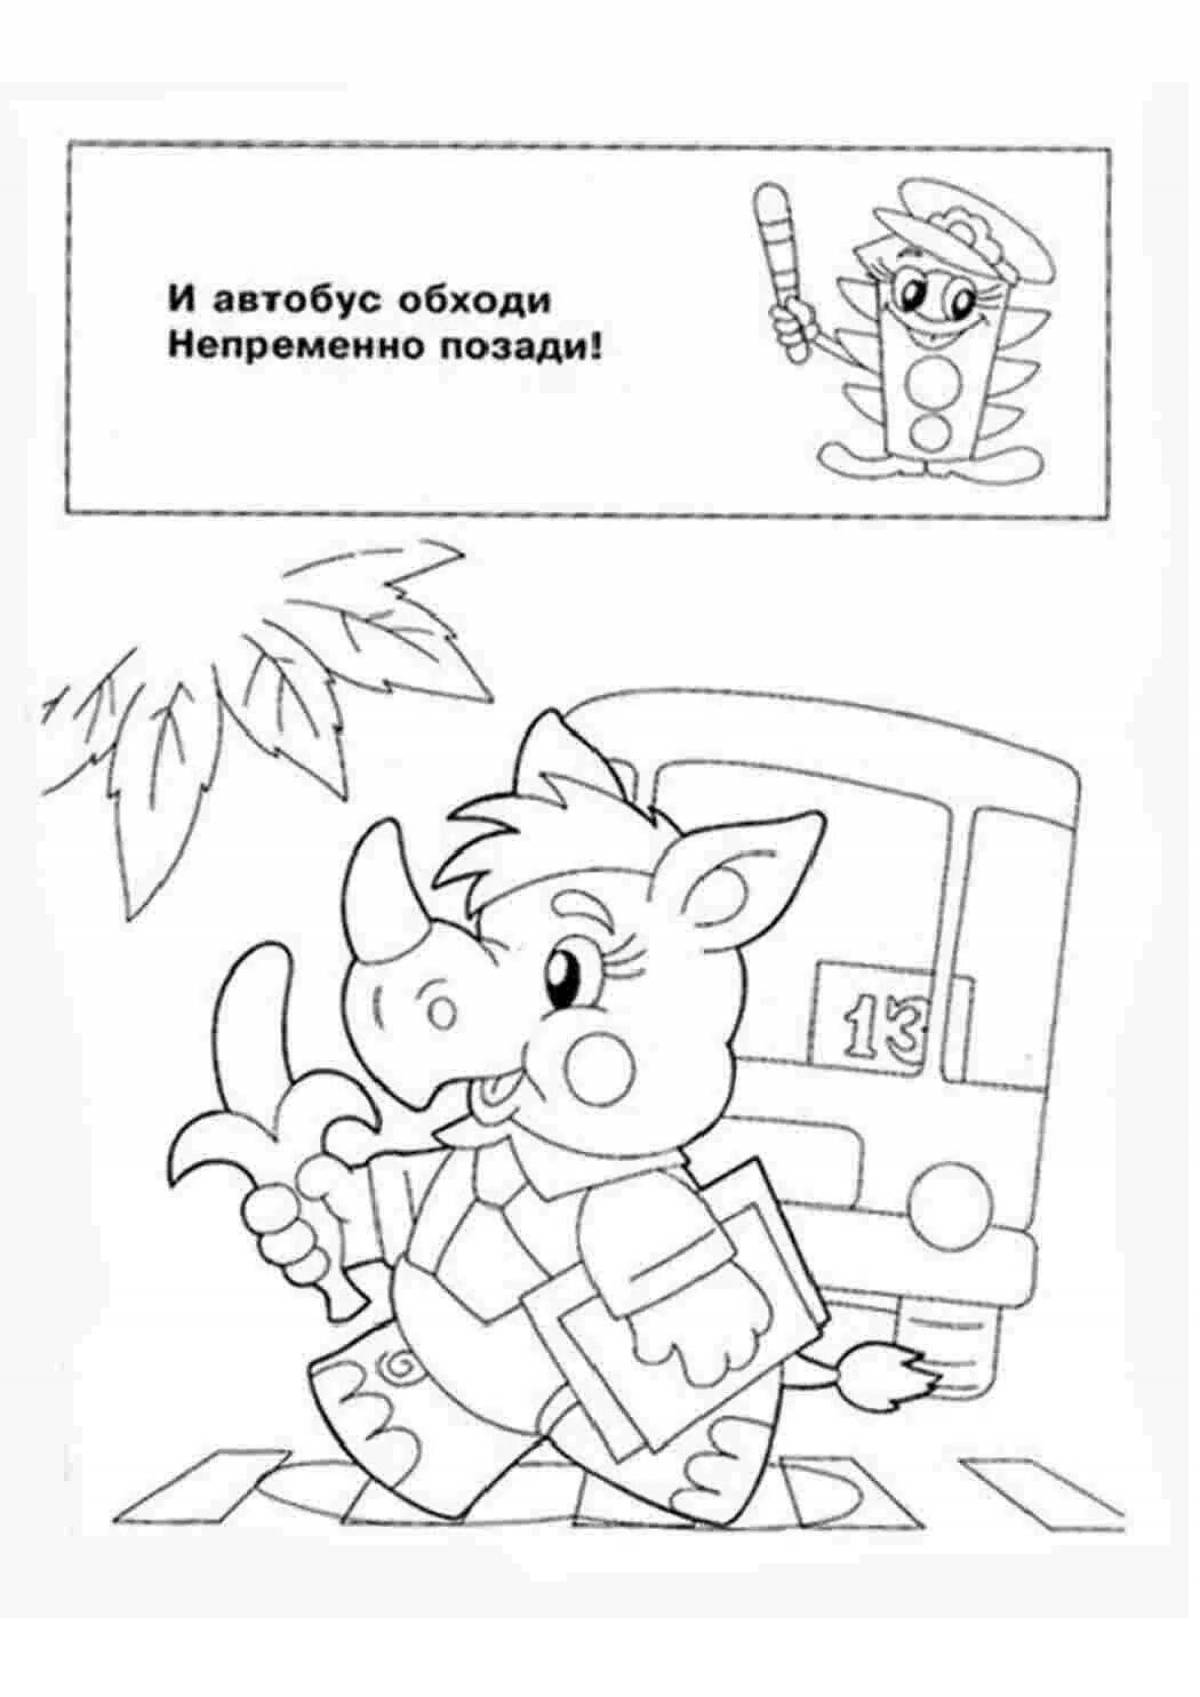 Playful rules of the road coloring book for kids